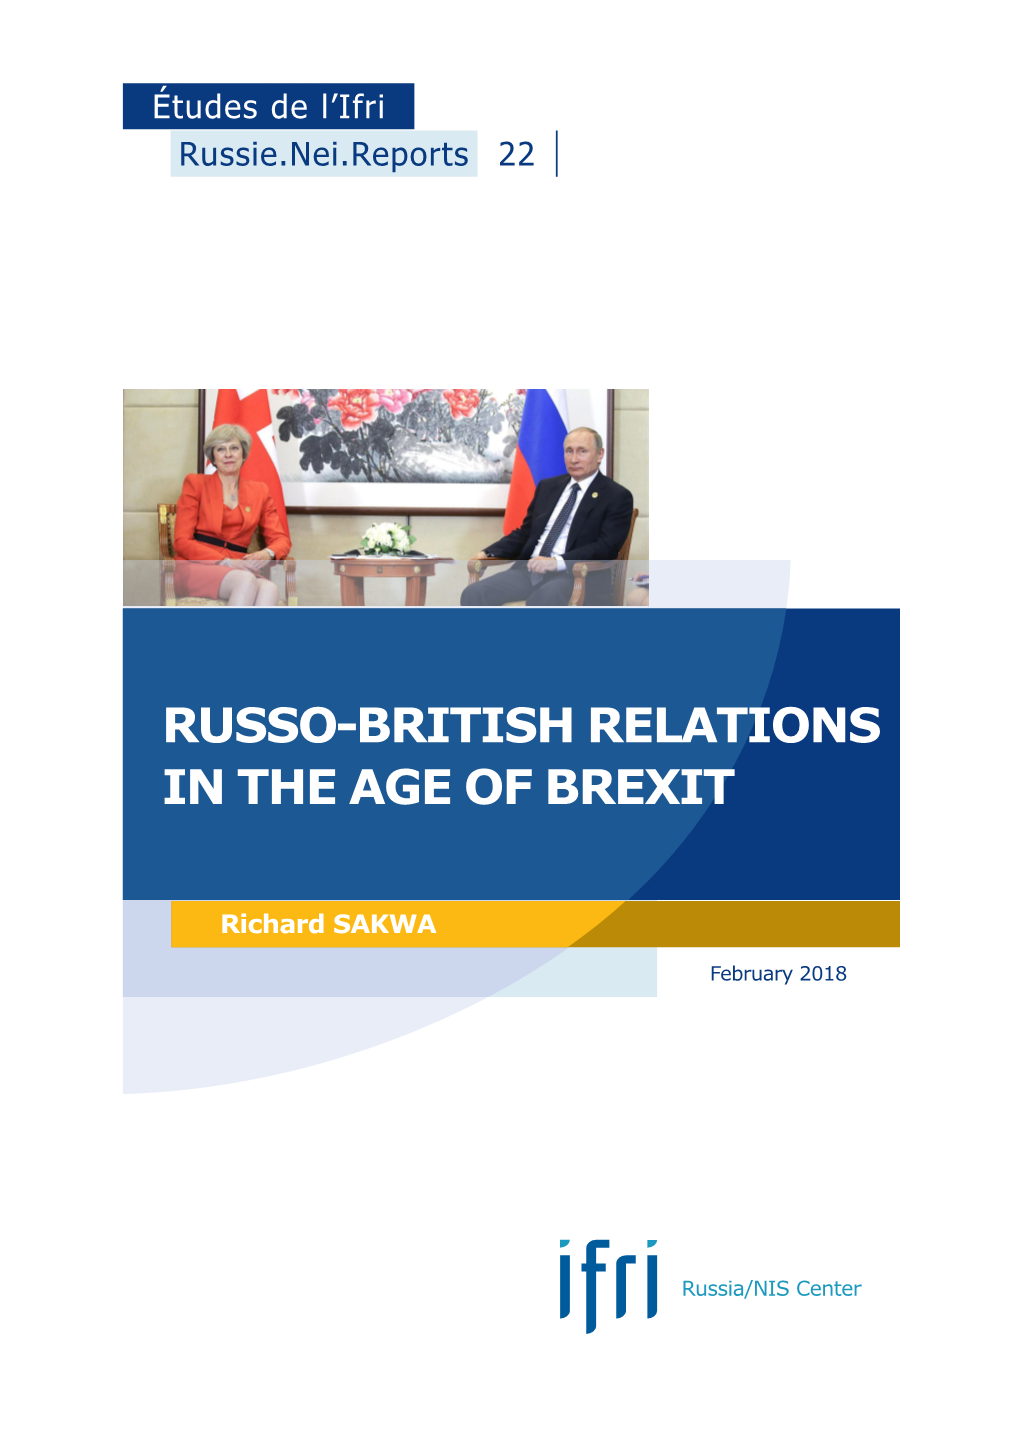 Russo-British Relations in the Age of Brexit